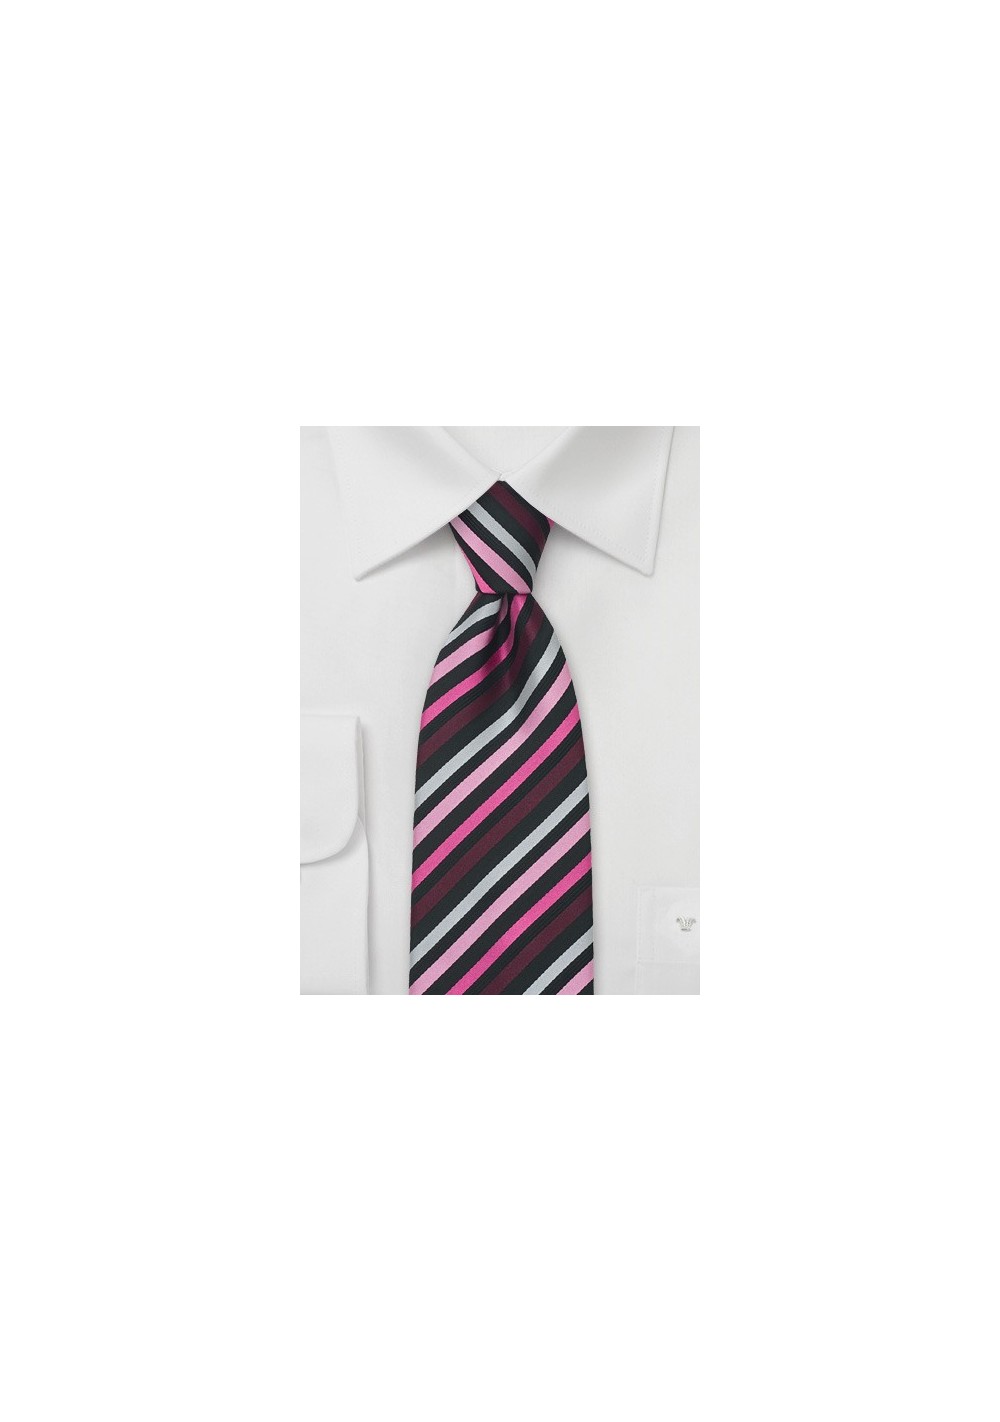 Striped Tie in Rose, Pink, Purple, and Black